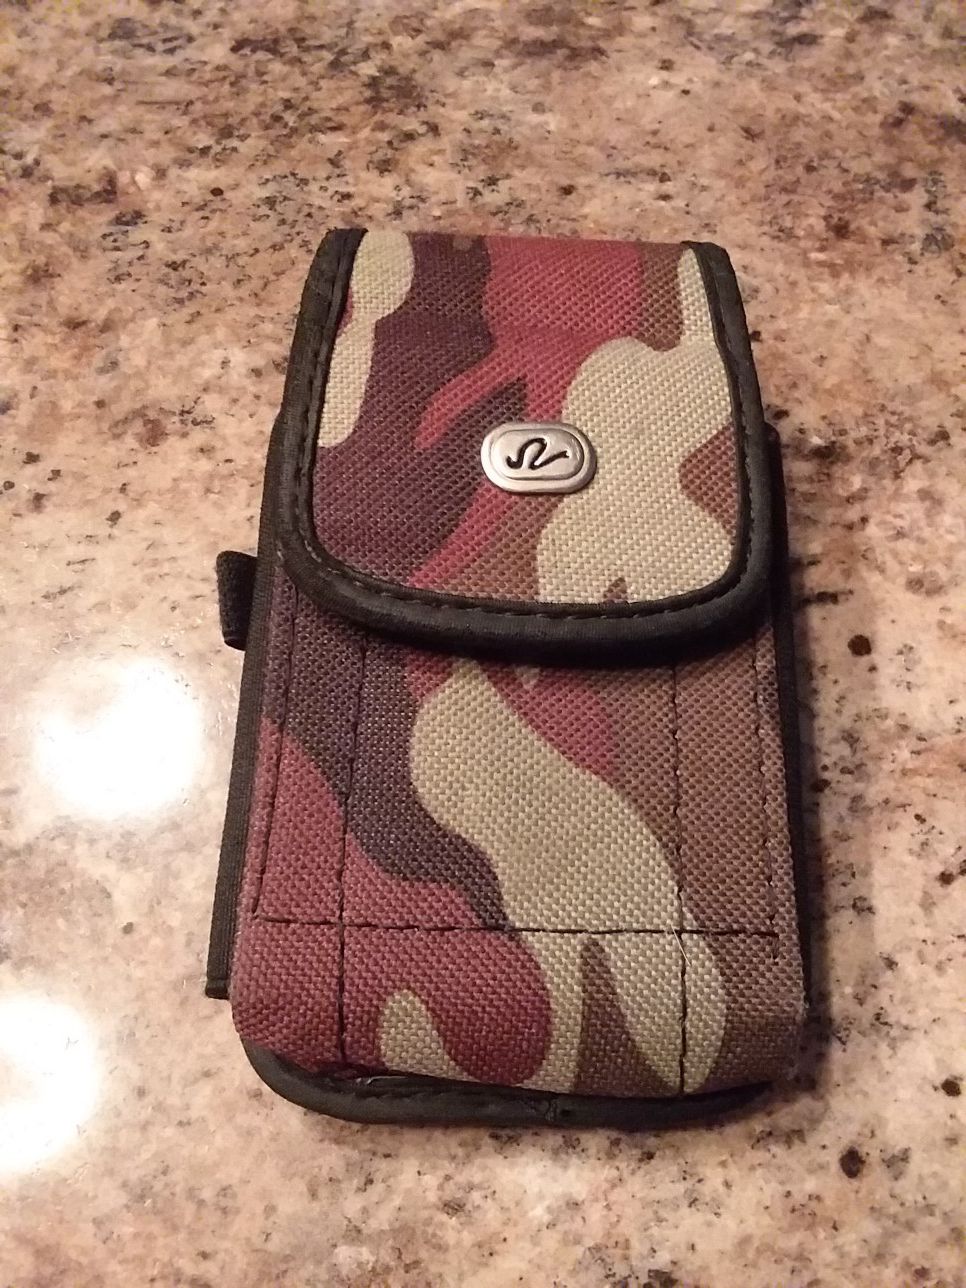 Free Camo Cell Phone Case